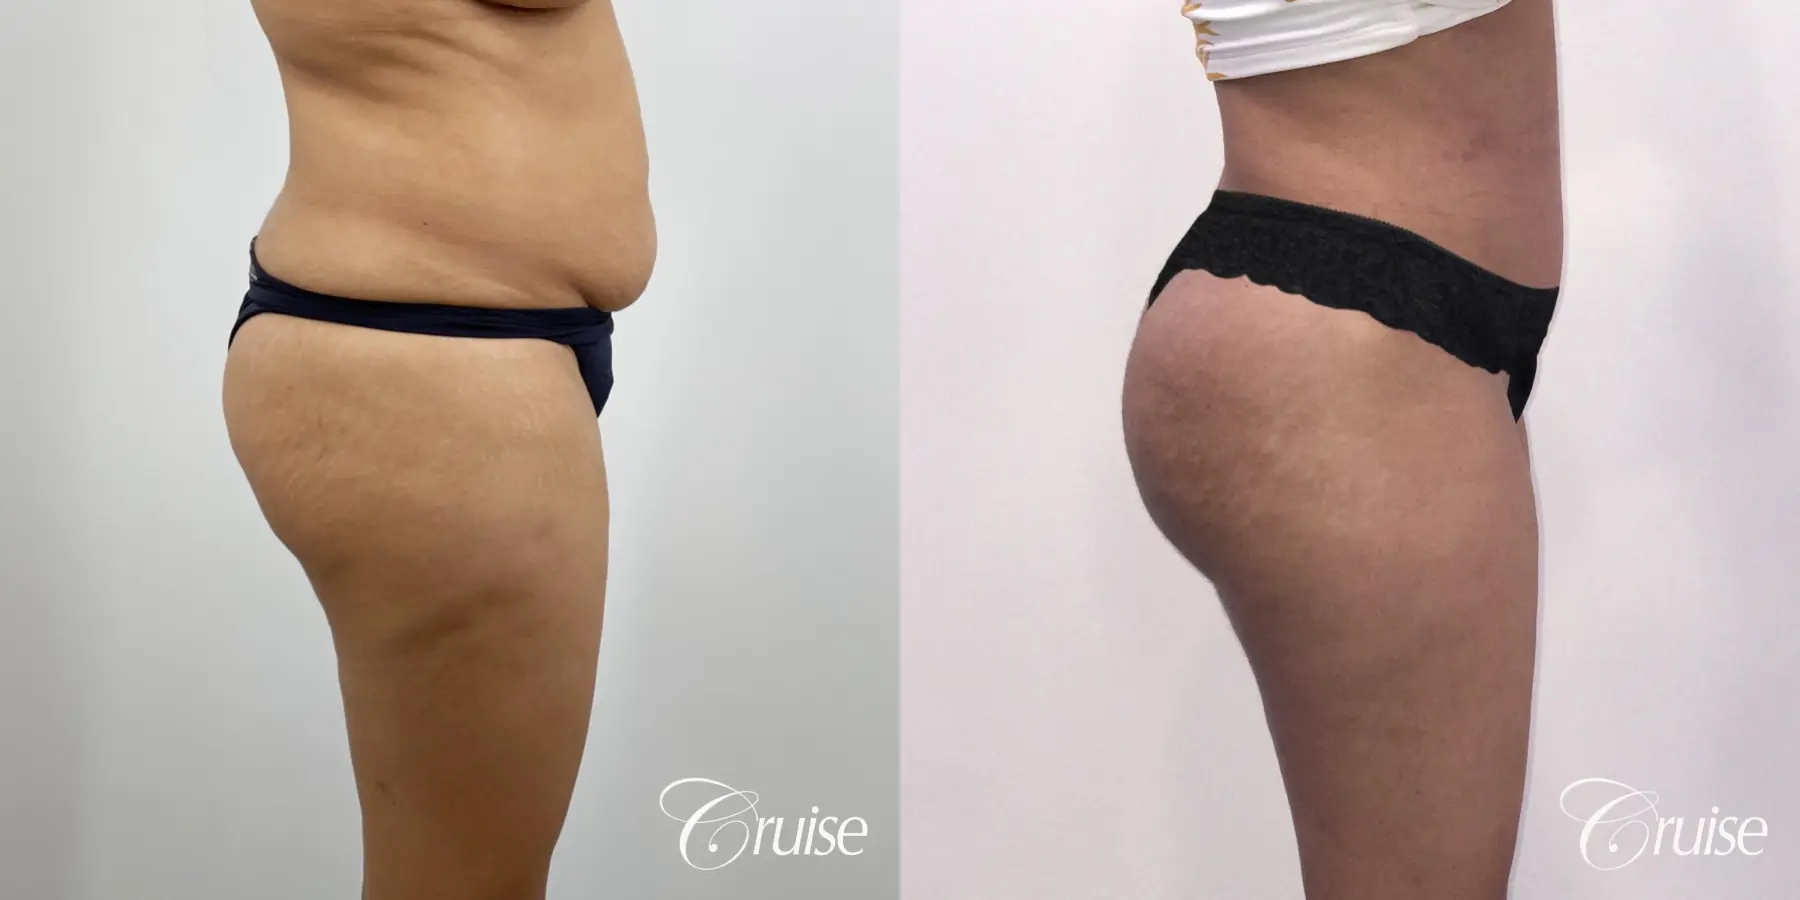 Liposuction - Before and After 5